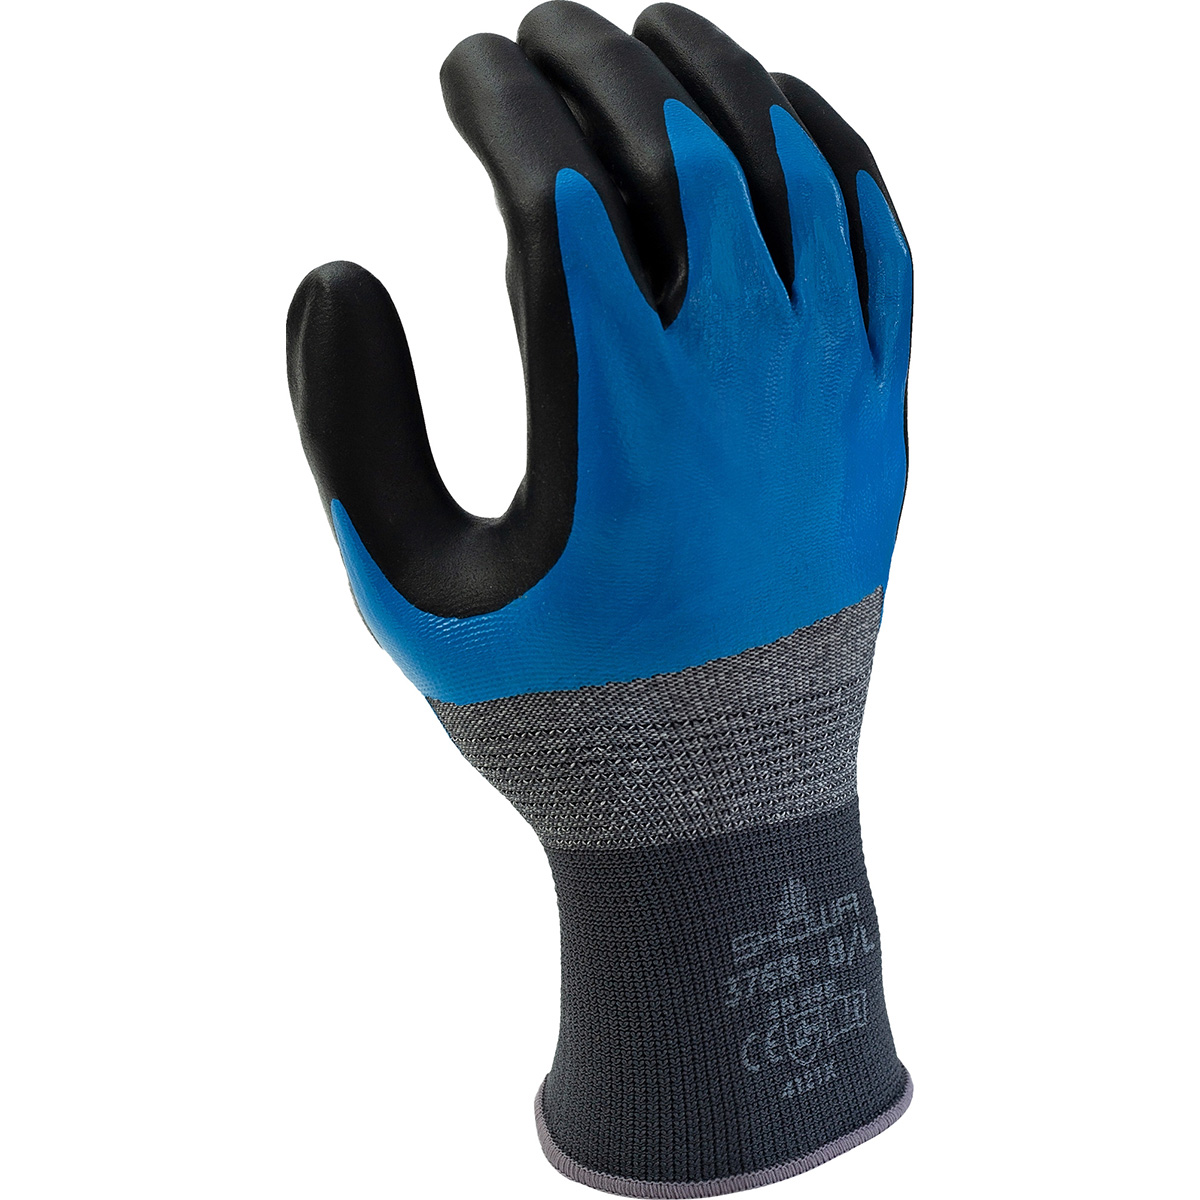 General purpose 3/4 nitrile blue undercoating w/black foamed palm coating, 13 gauge, 3/4 for over knuckle protection,  liquid resistant, seamless knitted liner, large